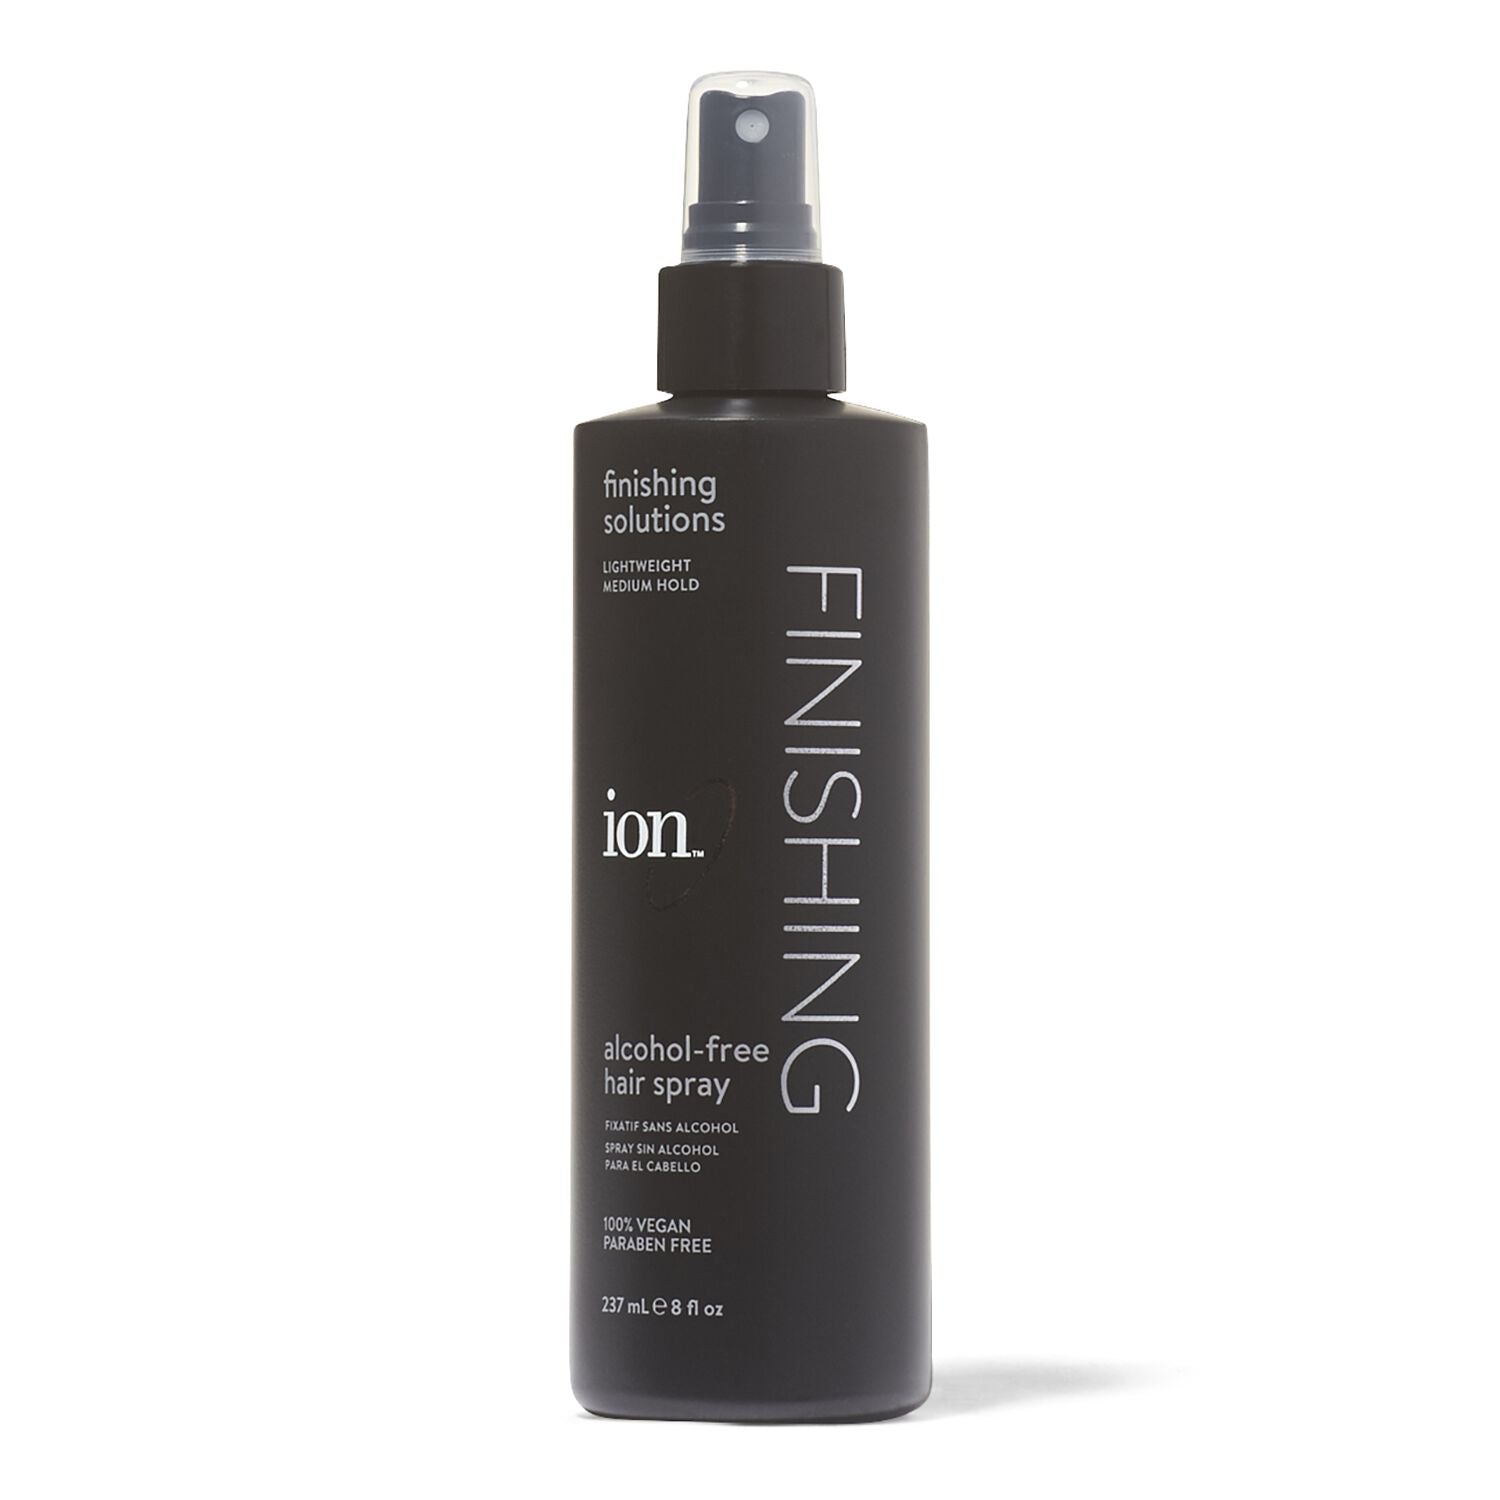 Finishing Solutions  by   ion Alcohol Free Hair Spray